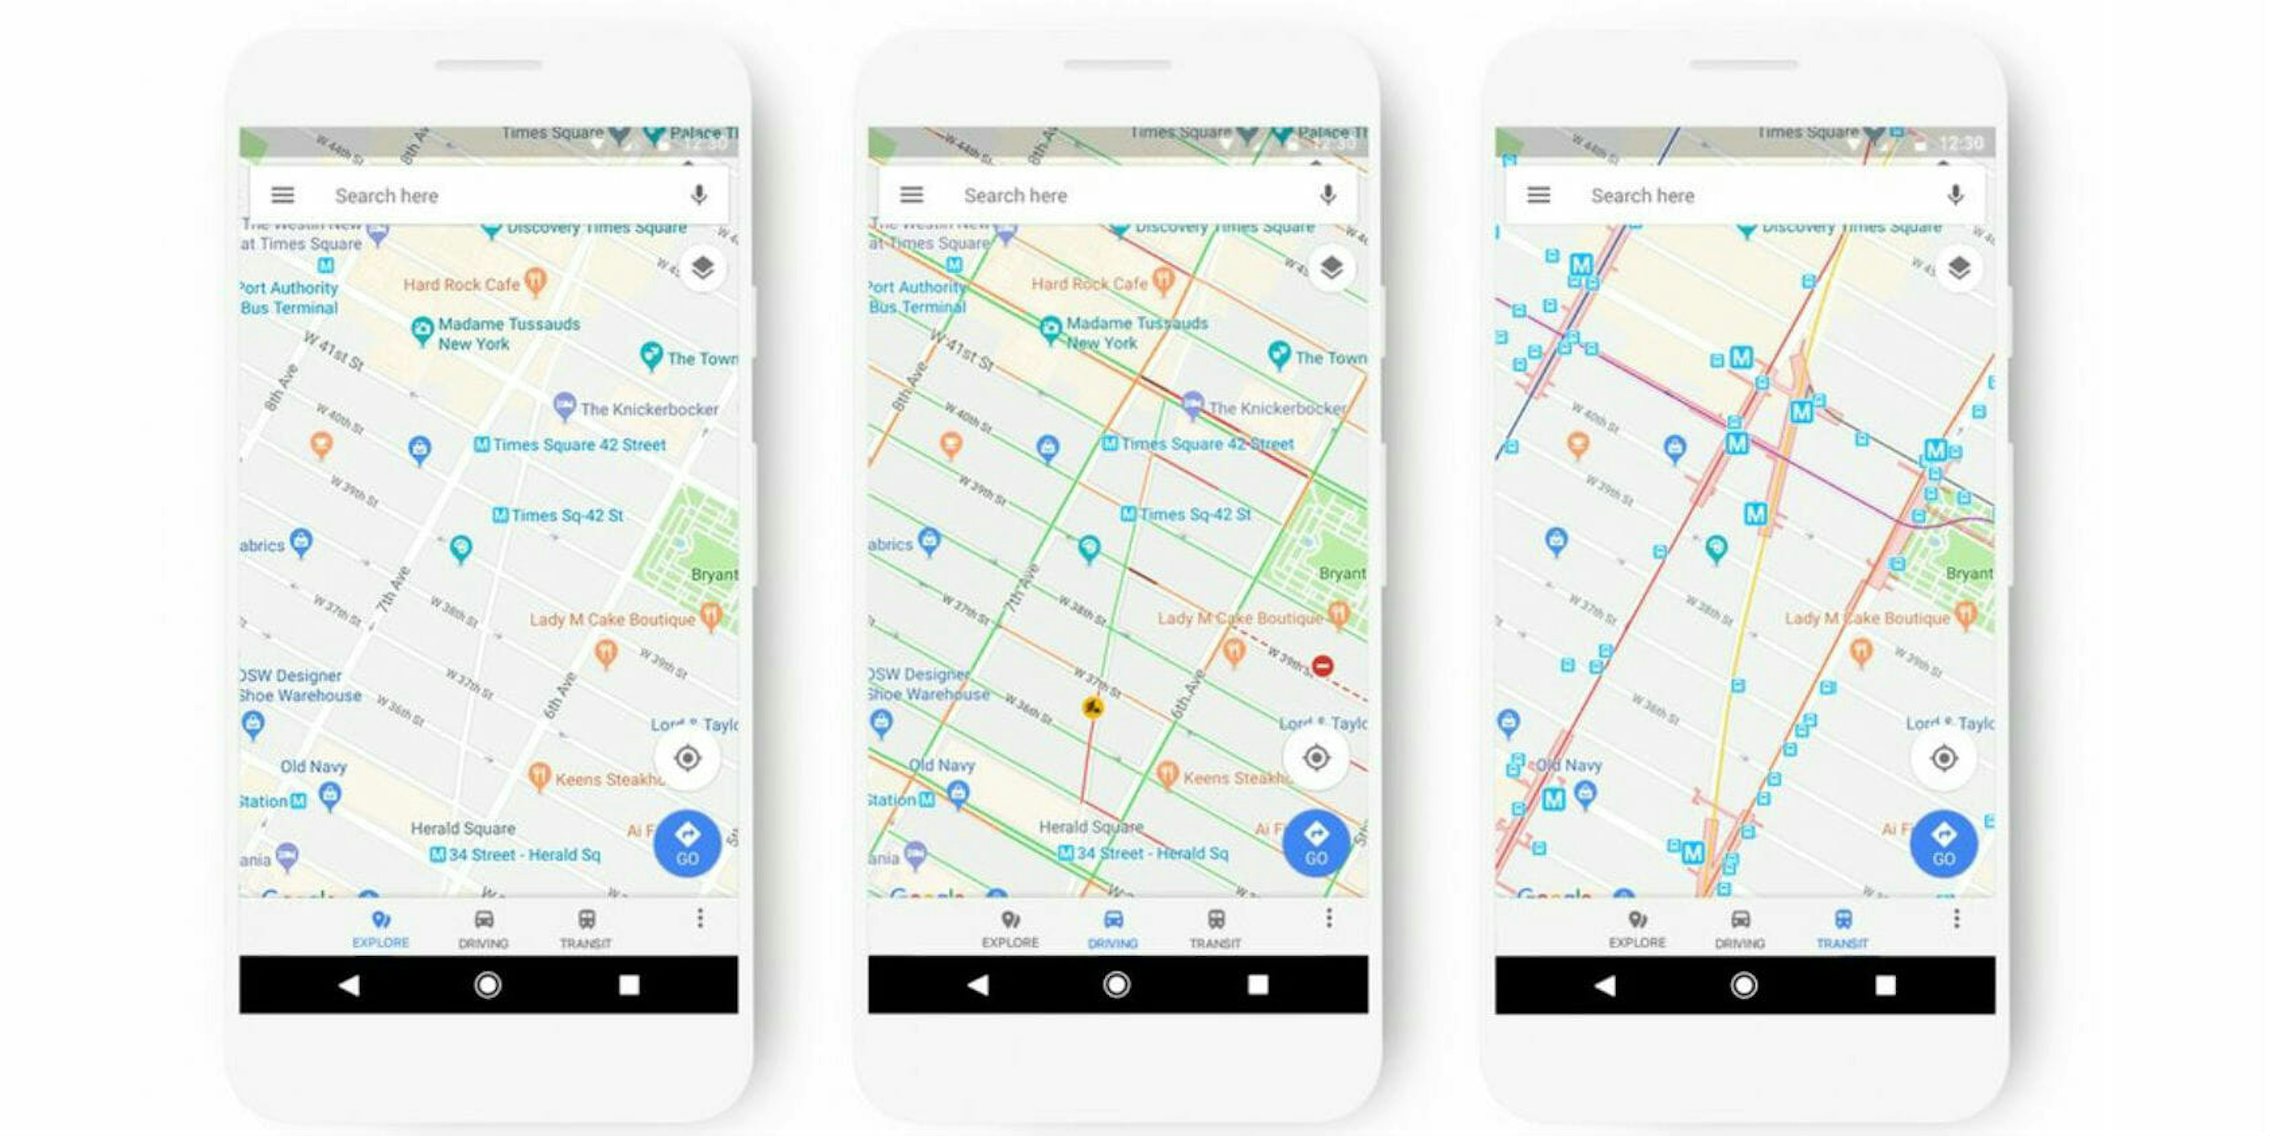 Google Maps Redesign Reveals Handy New Features